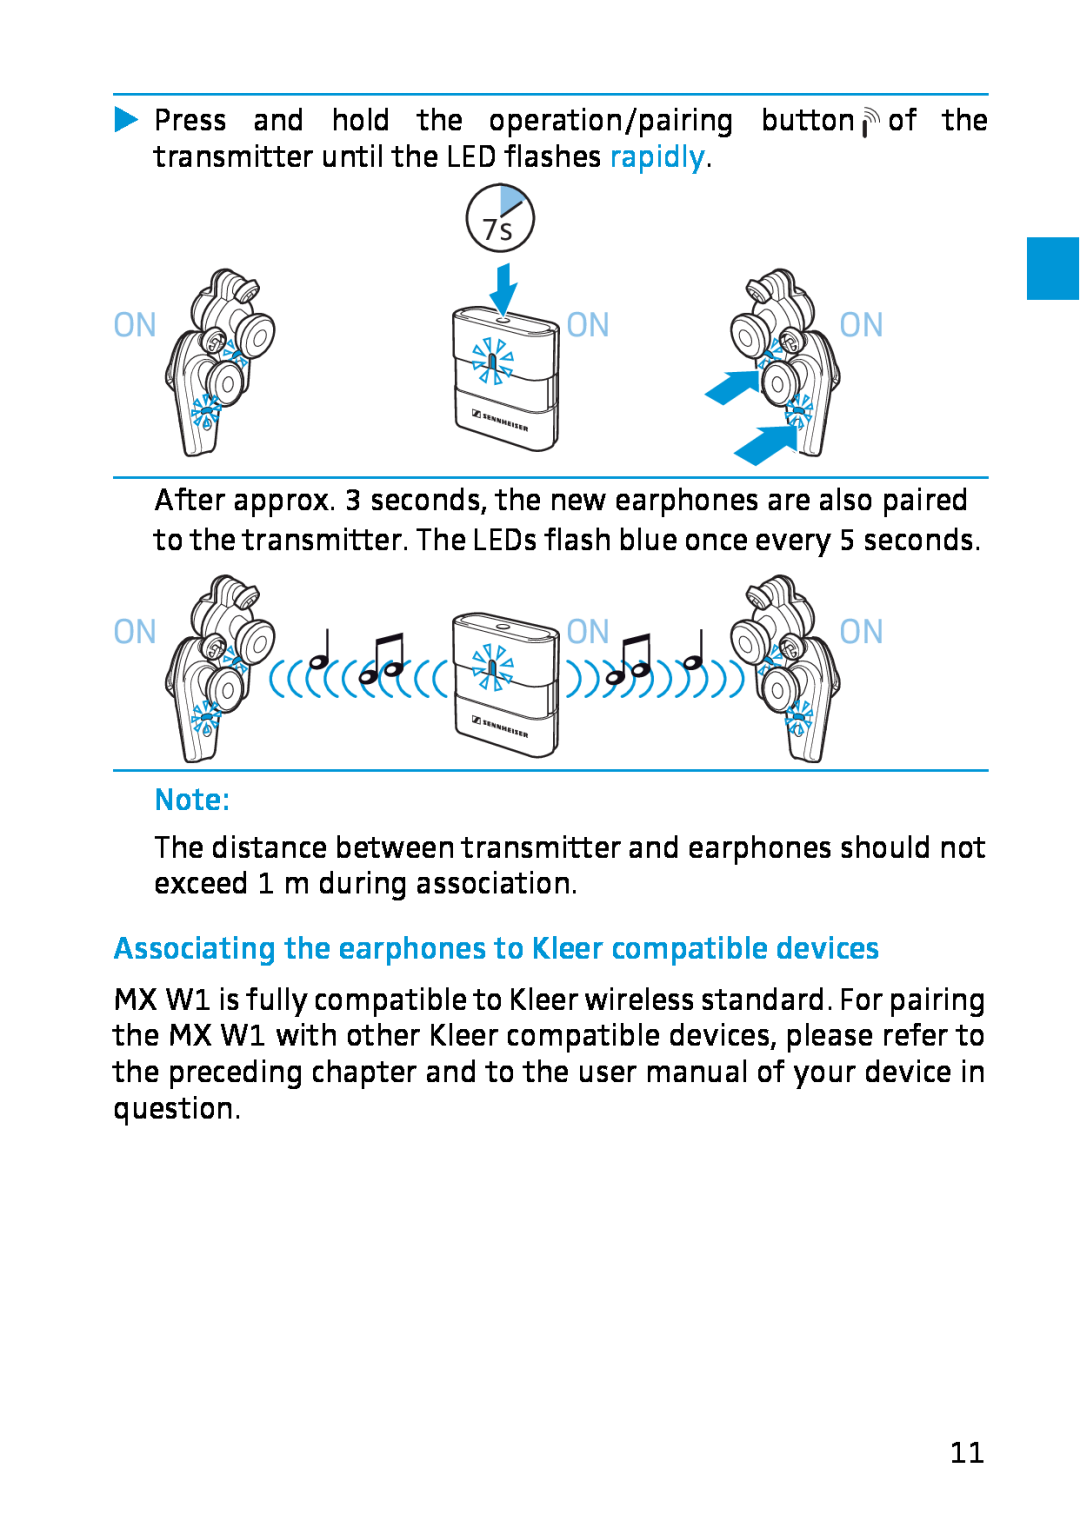 Sennheiser MX W1 instruction manual Associating the earphones to Kleer compatible devices 